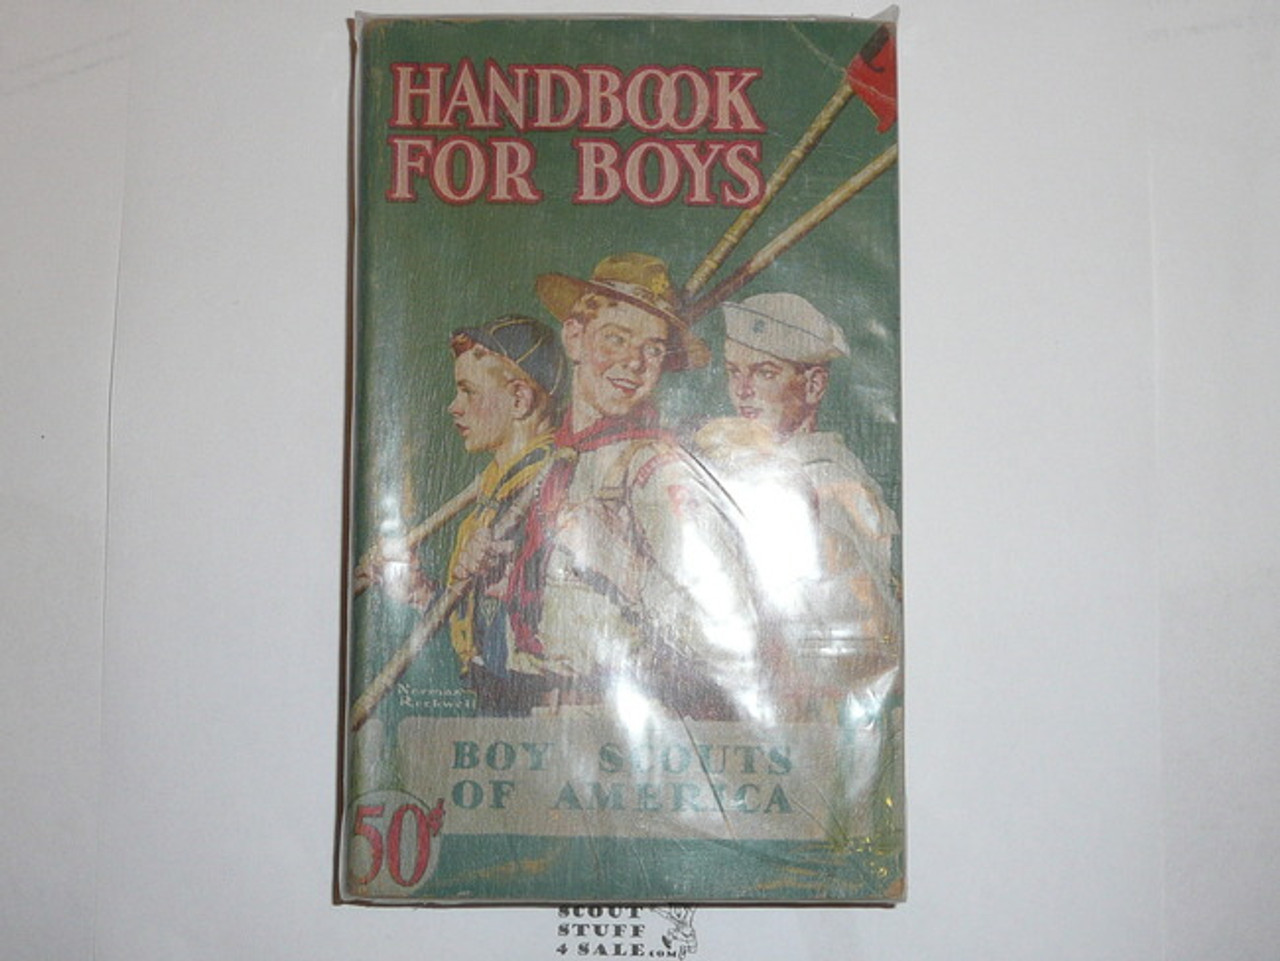 1946 Boy Scout Handbook, Fourth Edition, Thirty-ninth Printing, Norman Rockwell Cover, near MINT condition with some edge wear